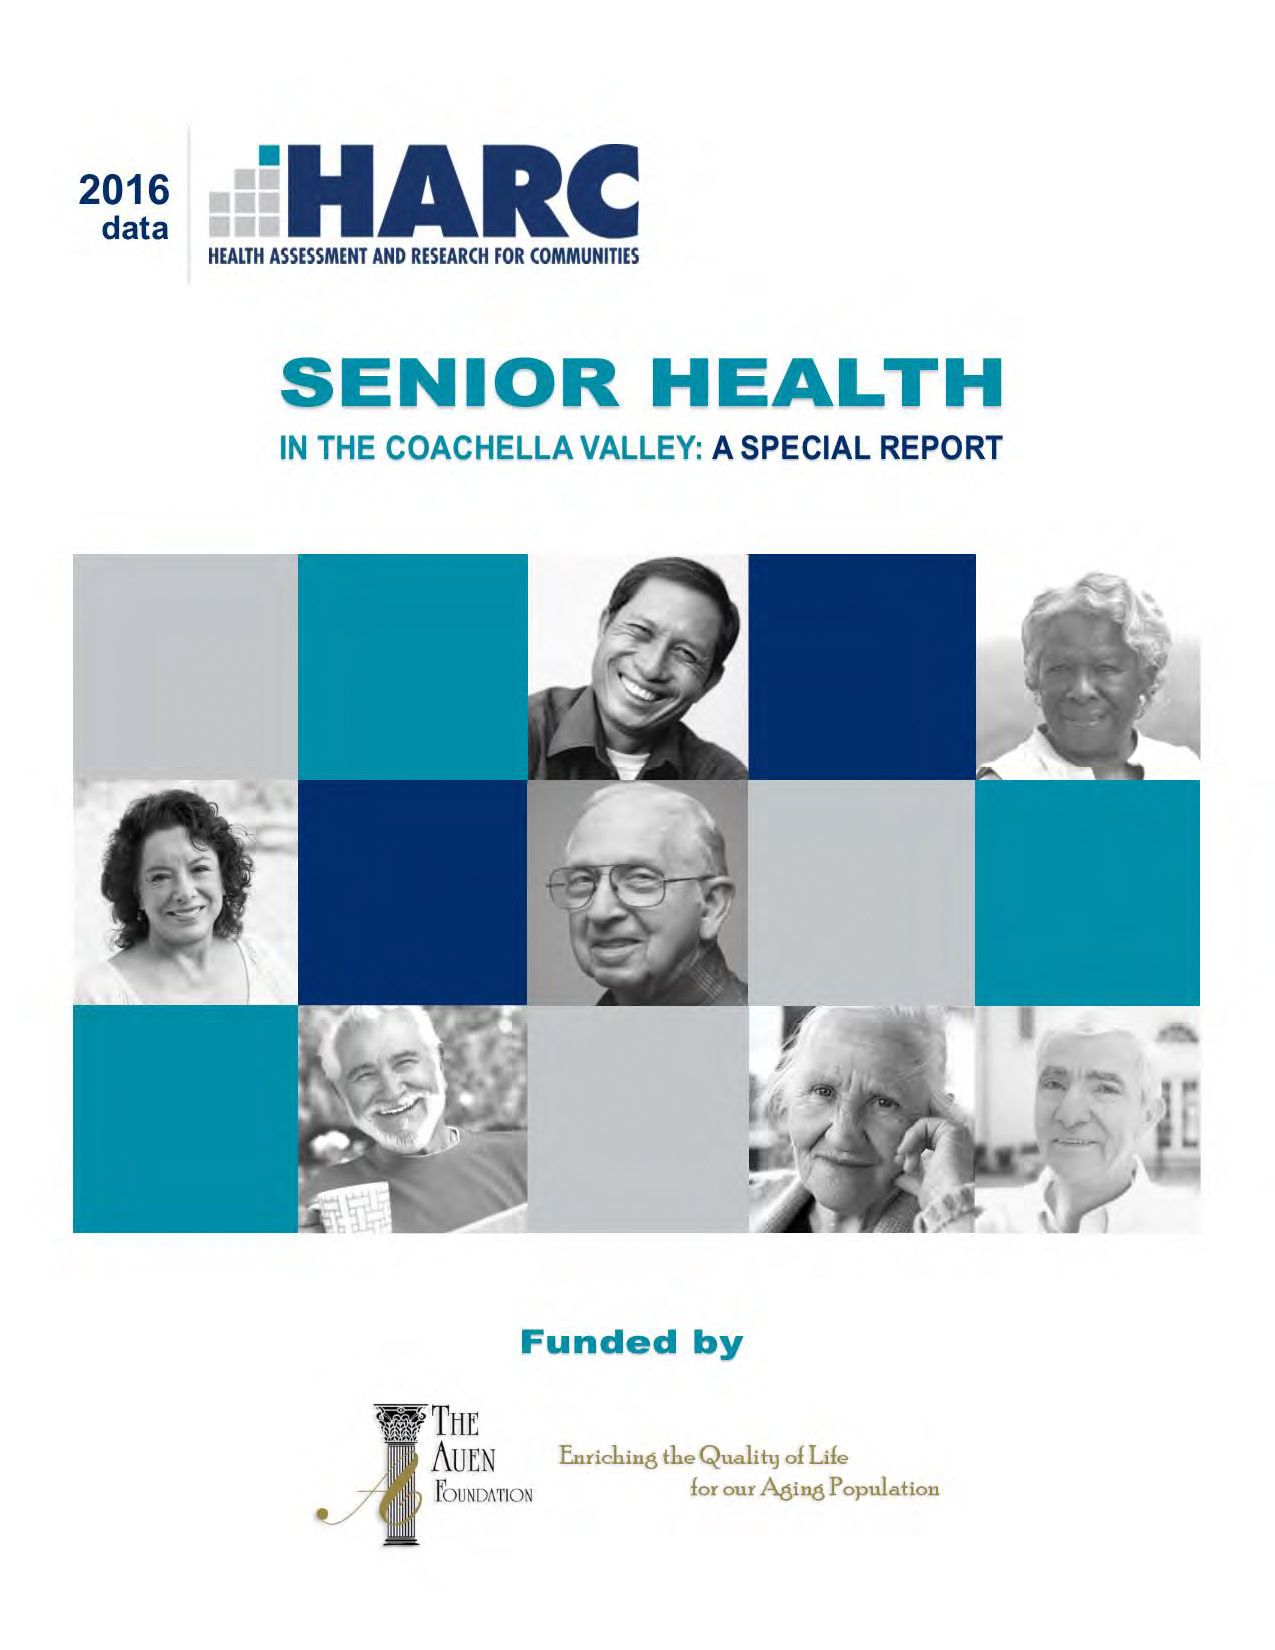 2016 Special Report on Senior Health in the Coachella Valley